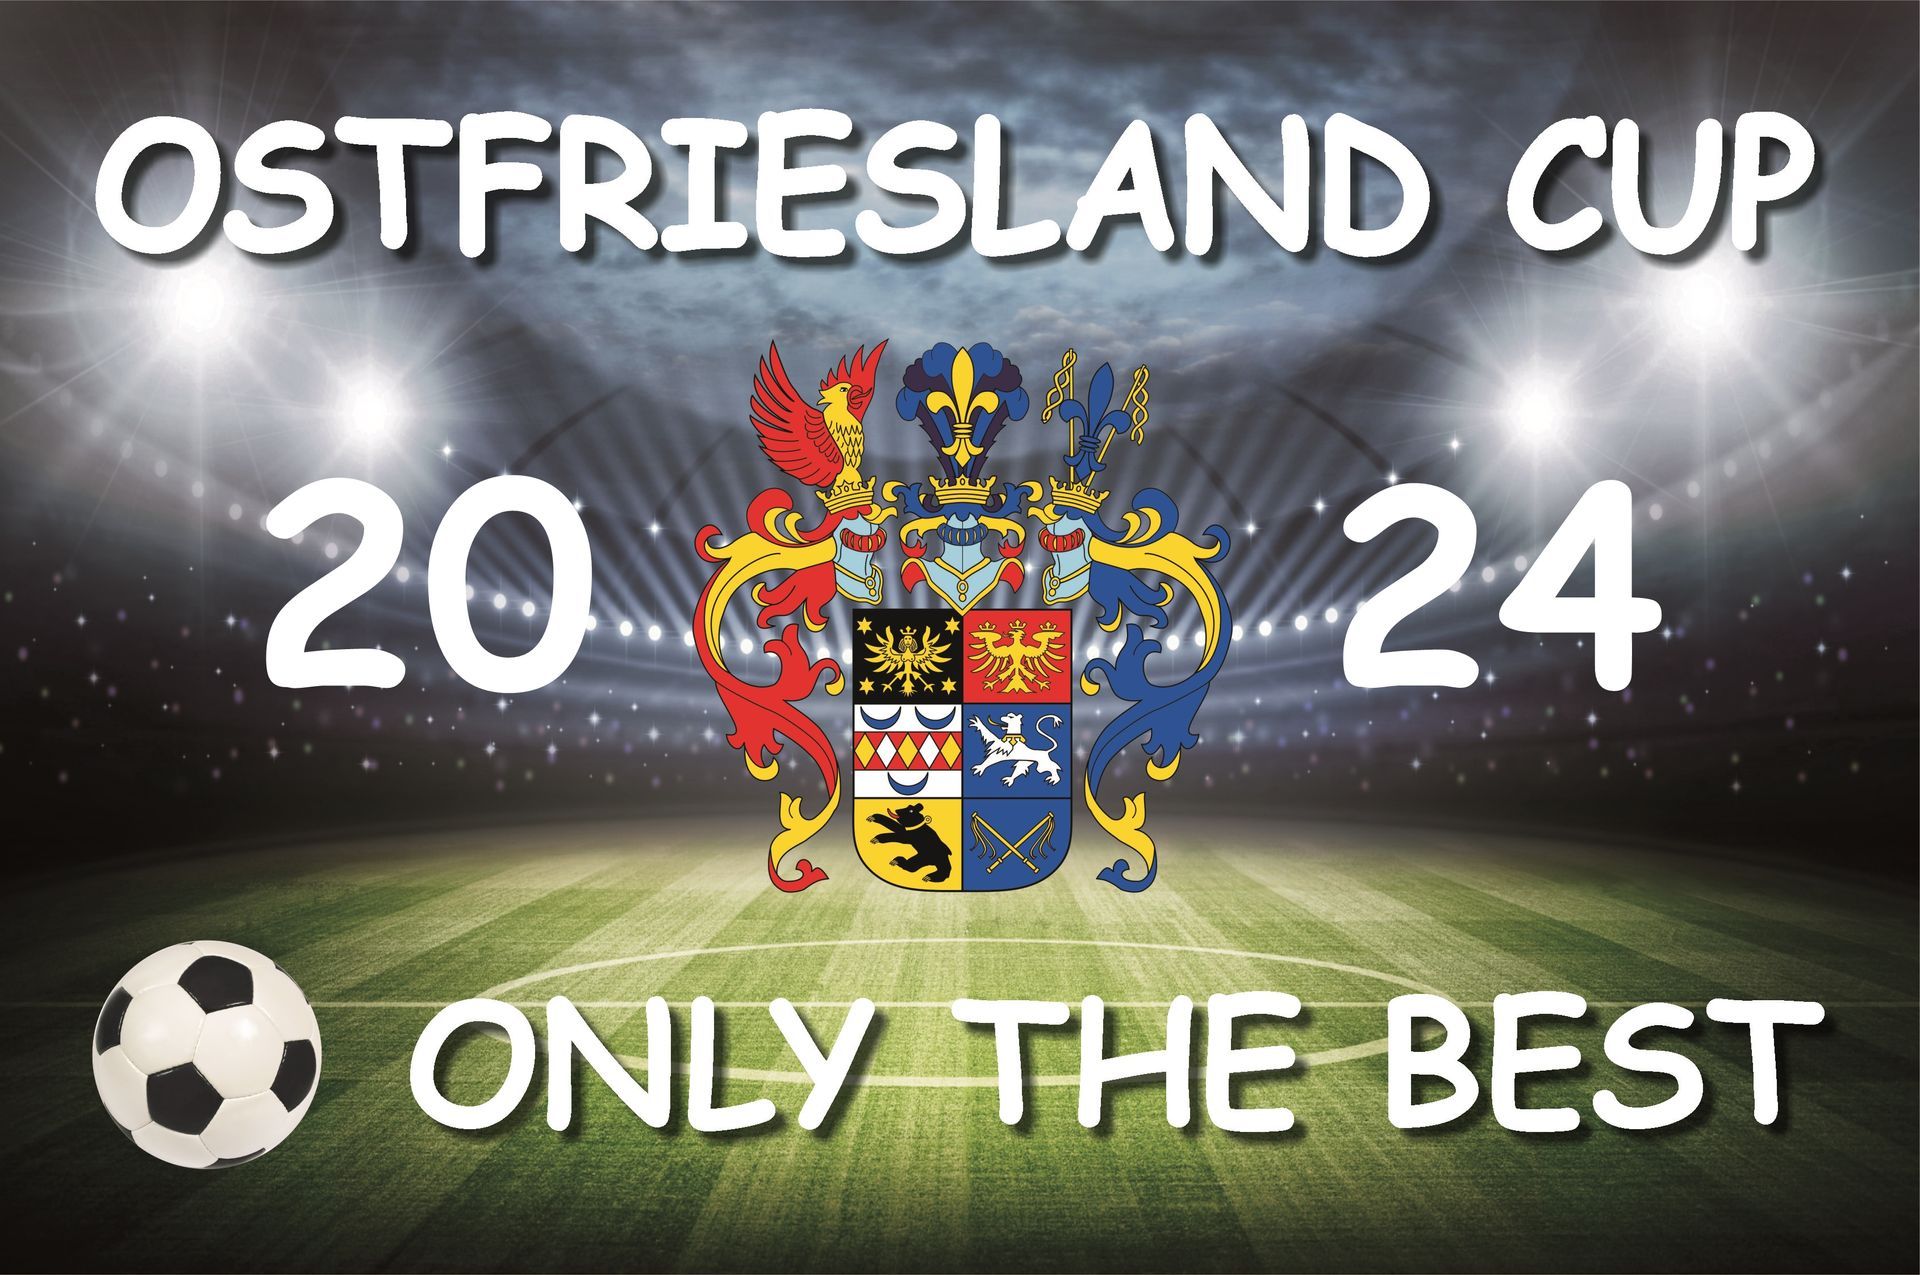 Ostfriesland Cup 2023 - Only the Best